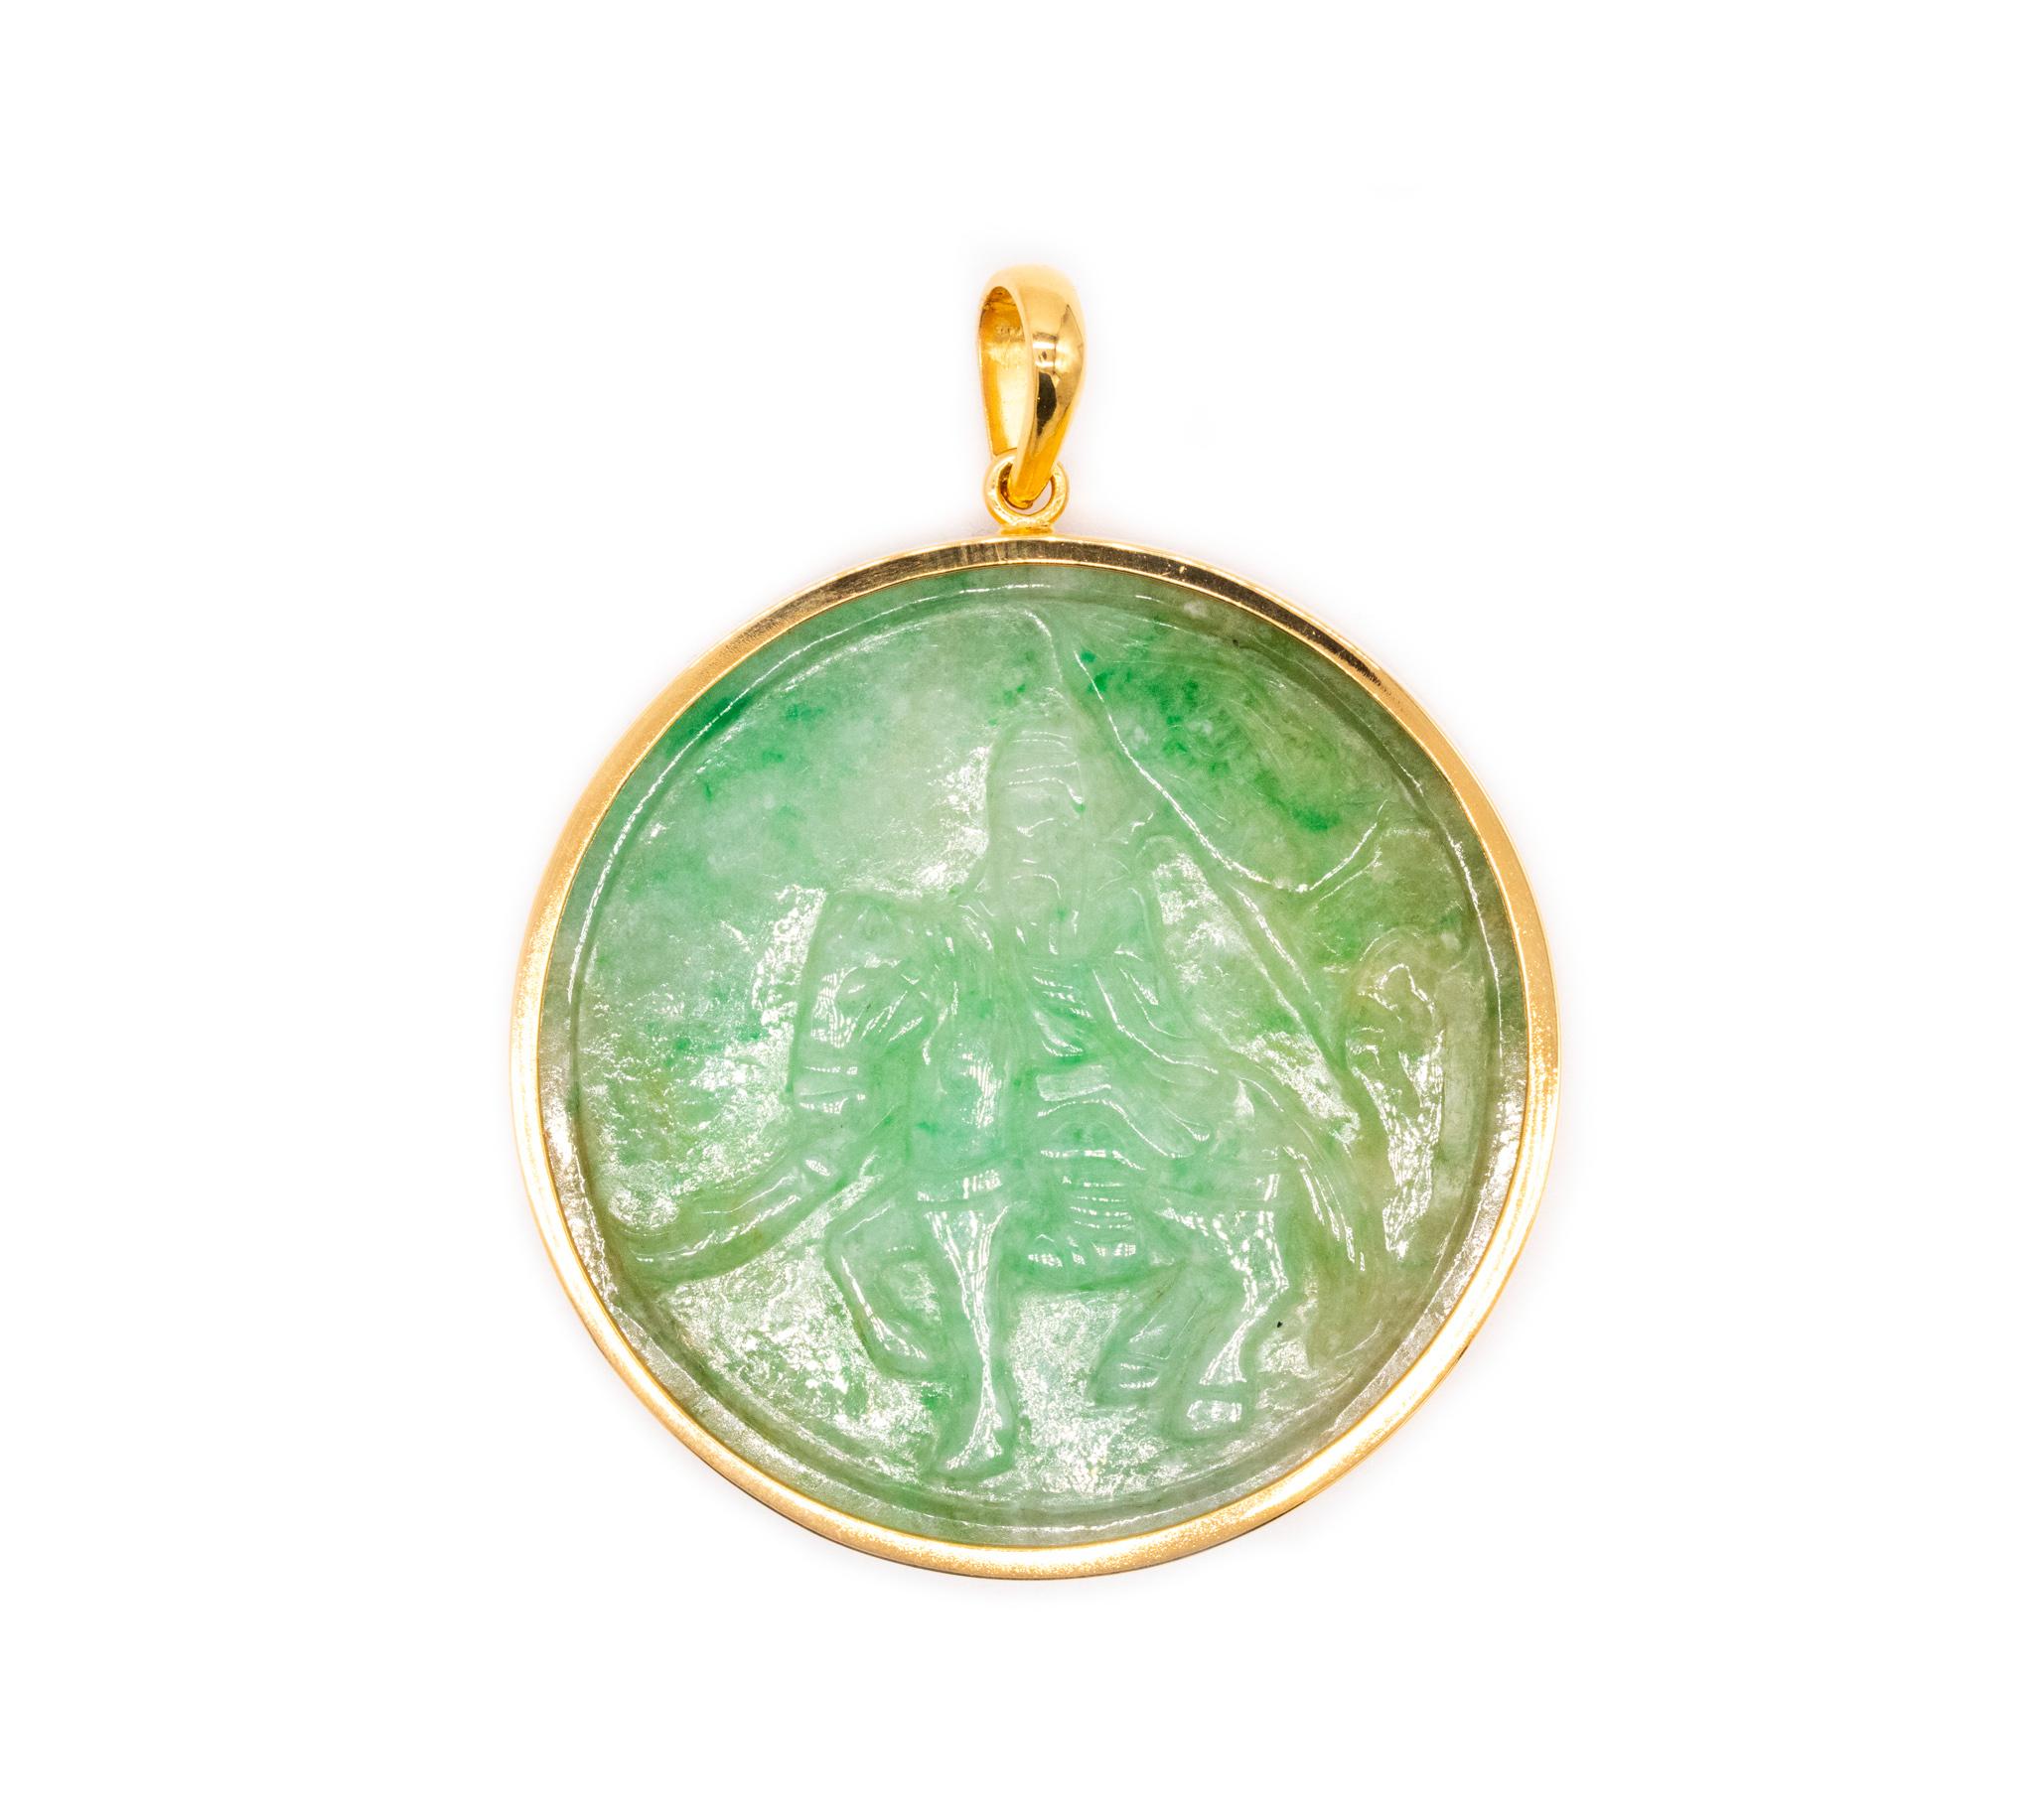 GIA Certified Jadeite Green Jade Pendant in 18Kt Yellow Gold 102.27 Cts Gemstone For Sale 2